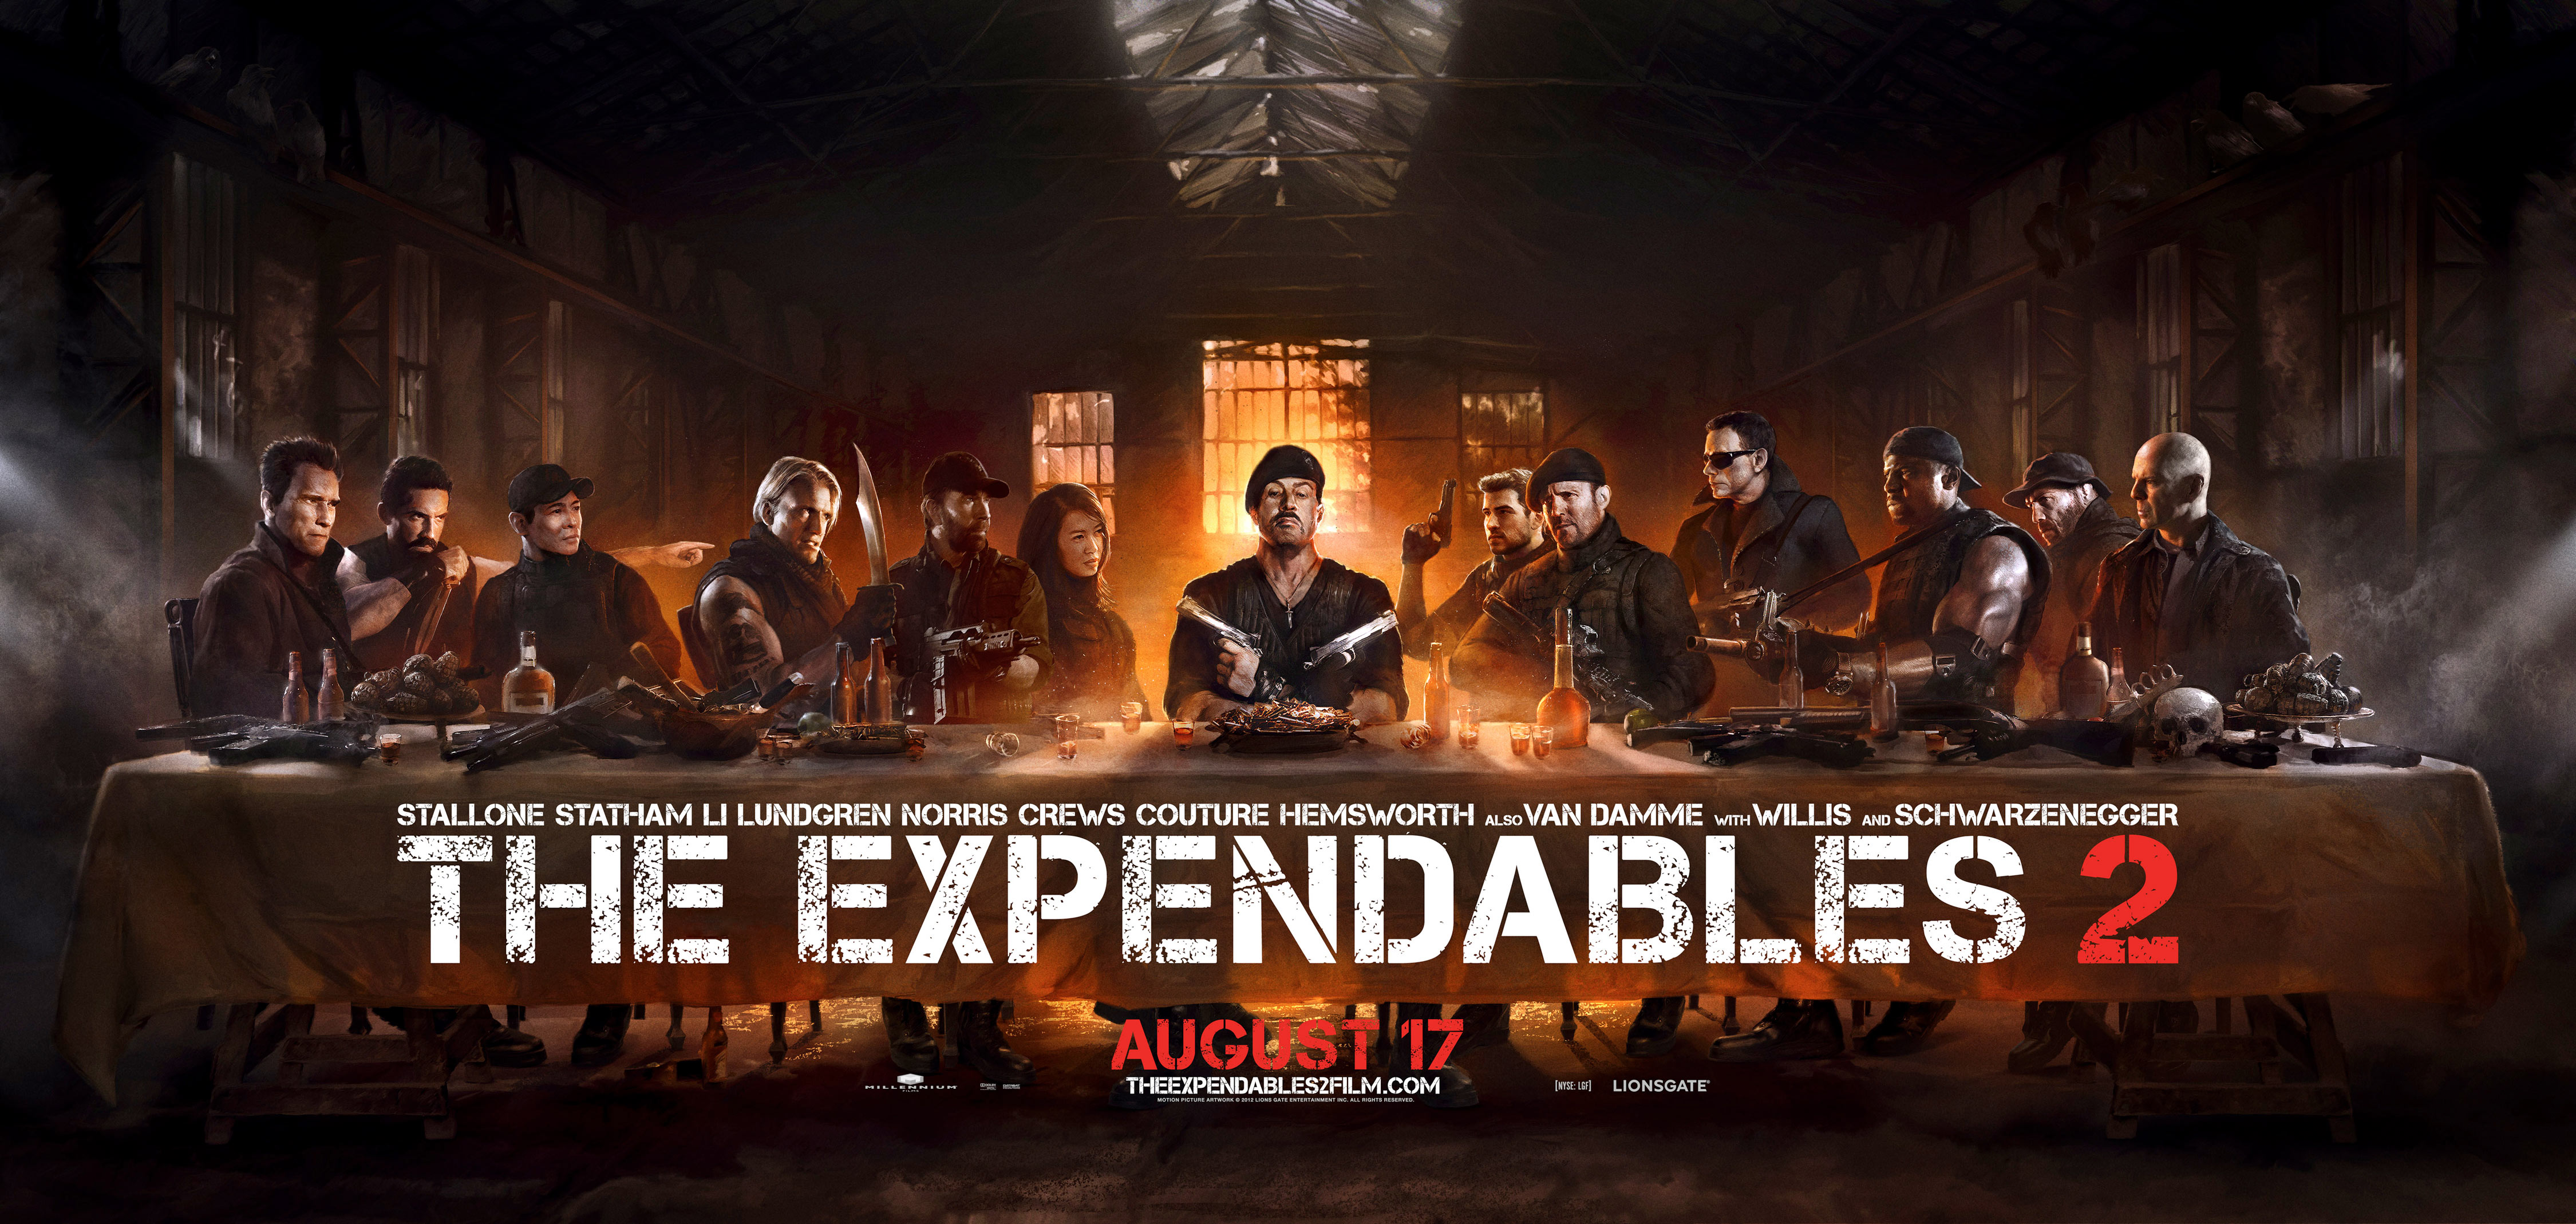 movie, the expendables 2, arnold schwarzenegger, barney ross, billy (the expendables), booker (the expendables), bruce willis, chuck norris, church (the expendables), dolph lundgren, gunnar jensen, hale caesar, jason statham, jean claude van damme, jet li, lee christmas, liam hemsworth, maggie (the expendables), nan yu, randy couture, sylvester stallone, terry crews, toll road, trench (the expendables), vilain (the expendables), yin yang (the expendables), the expendables